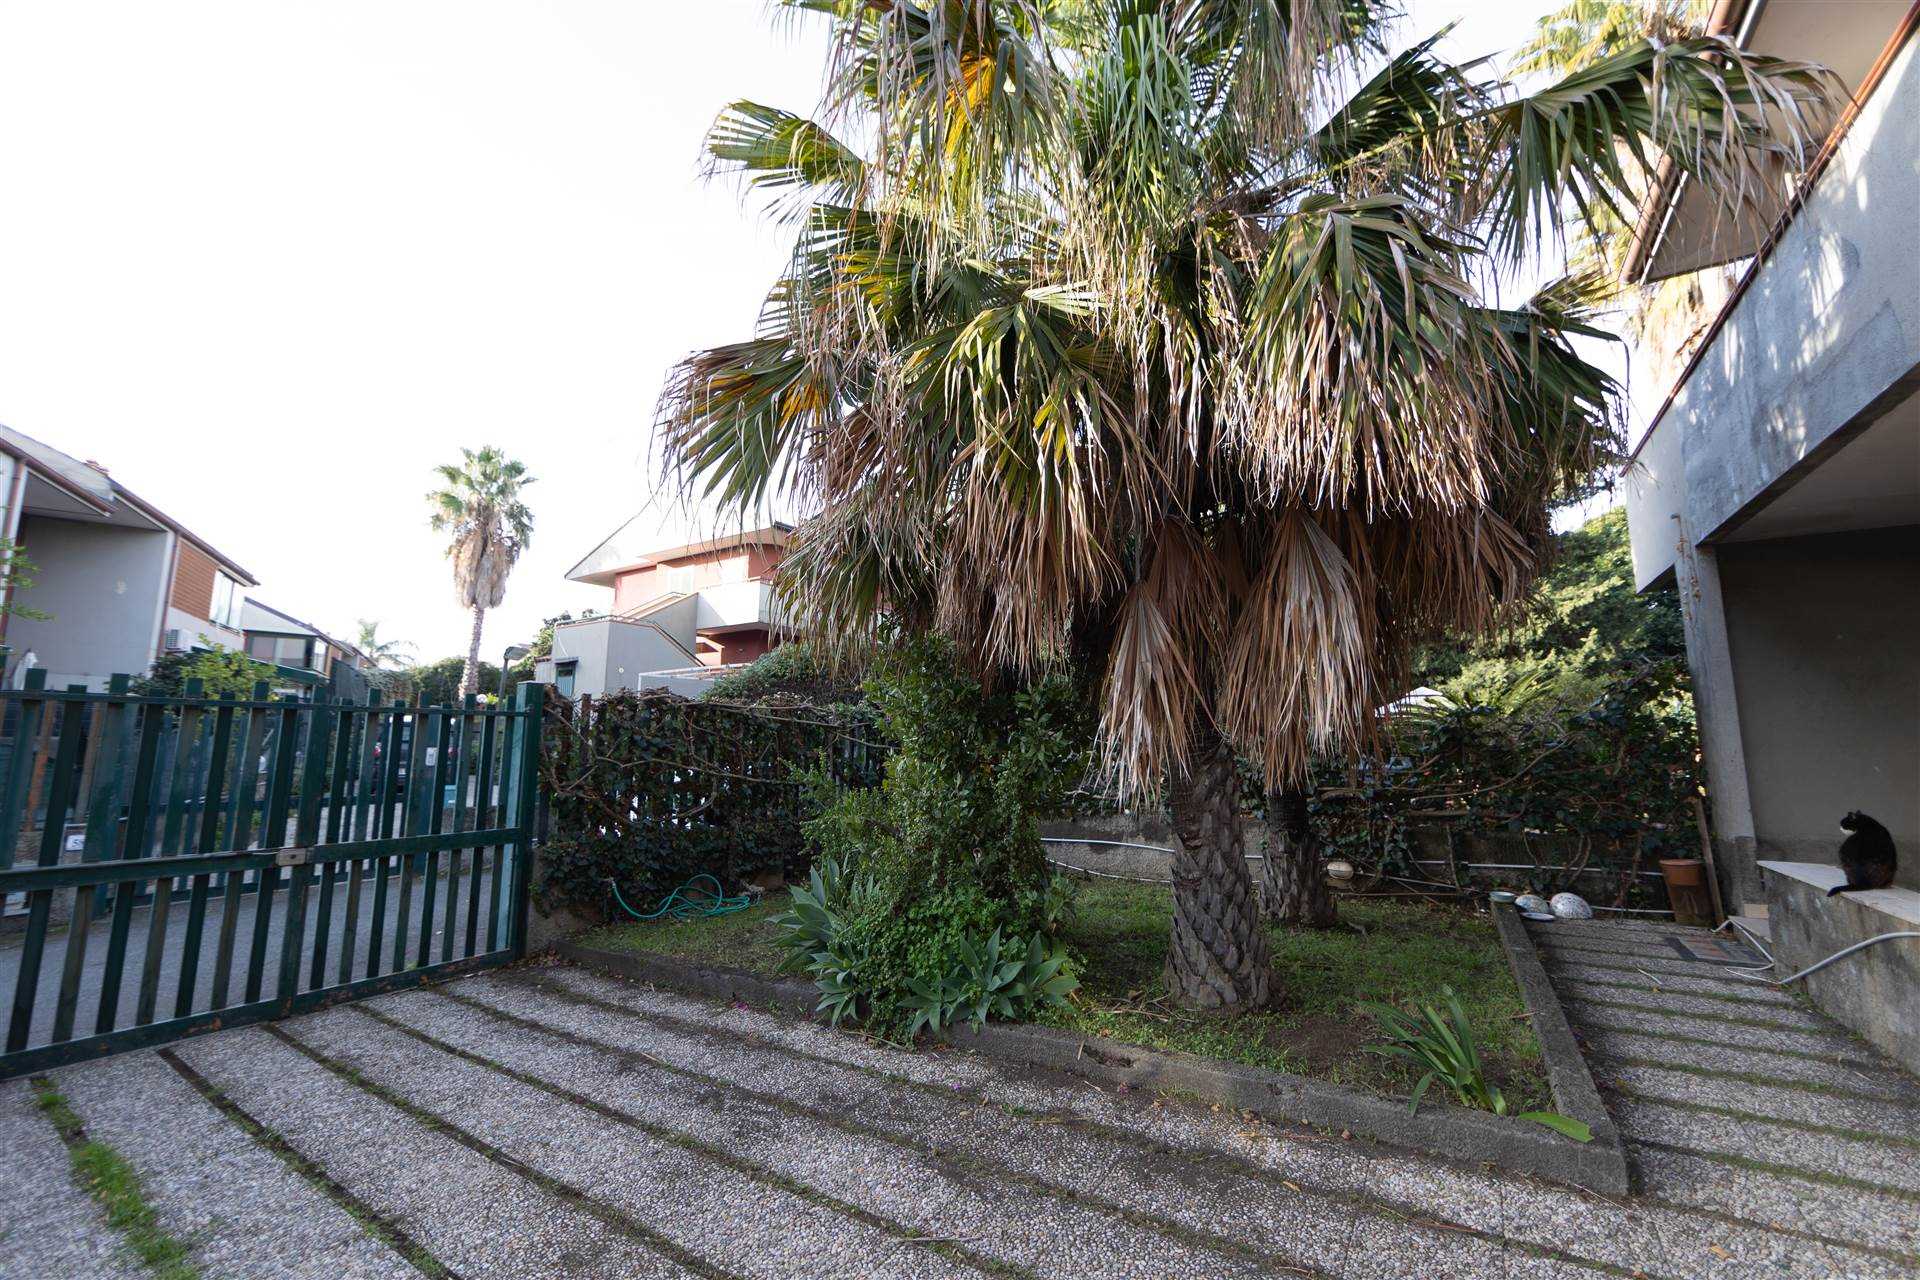 ACI CATENA, Apartment for sale of 106 Sq. mt., Good condition, Heating Individual heating system, Energetic class: G, placed at Ground, composed by: 